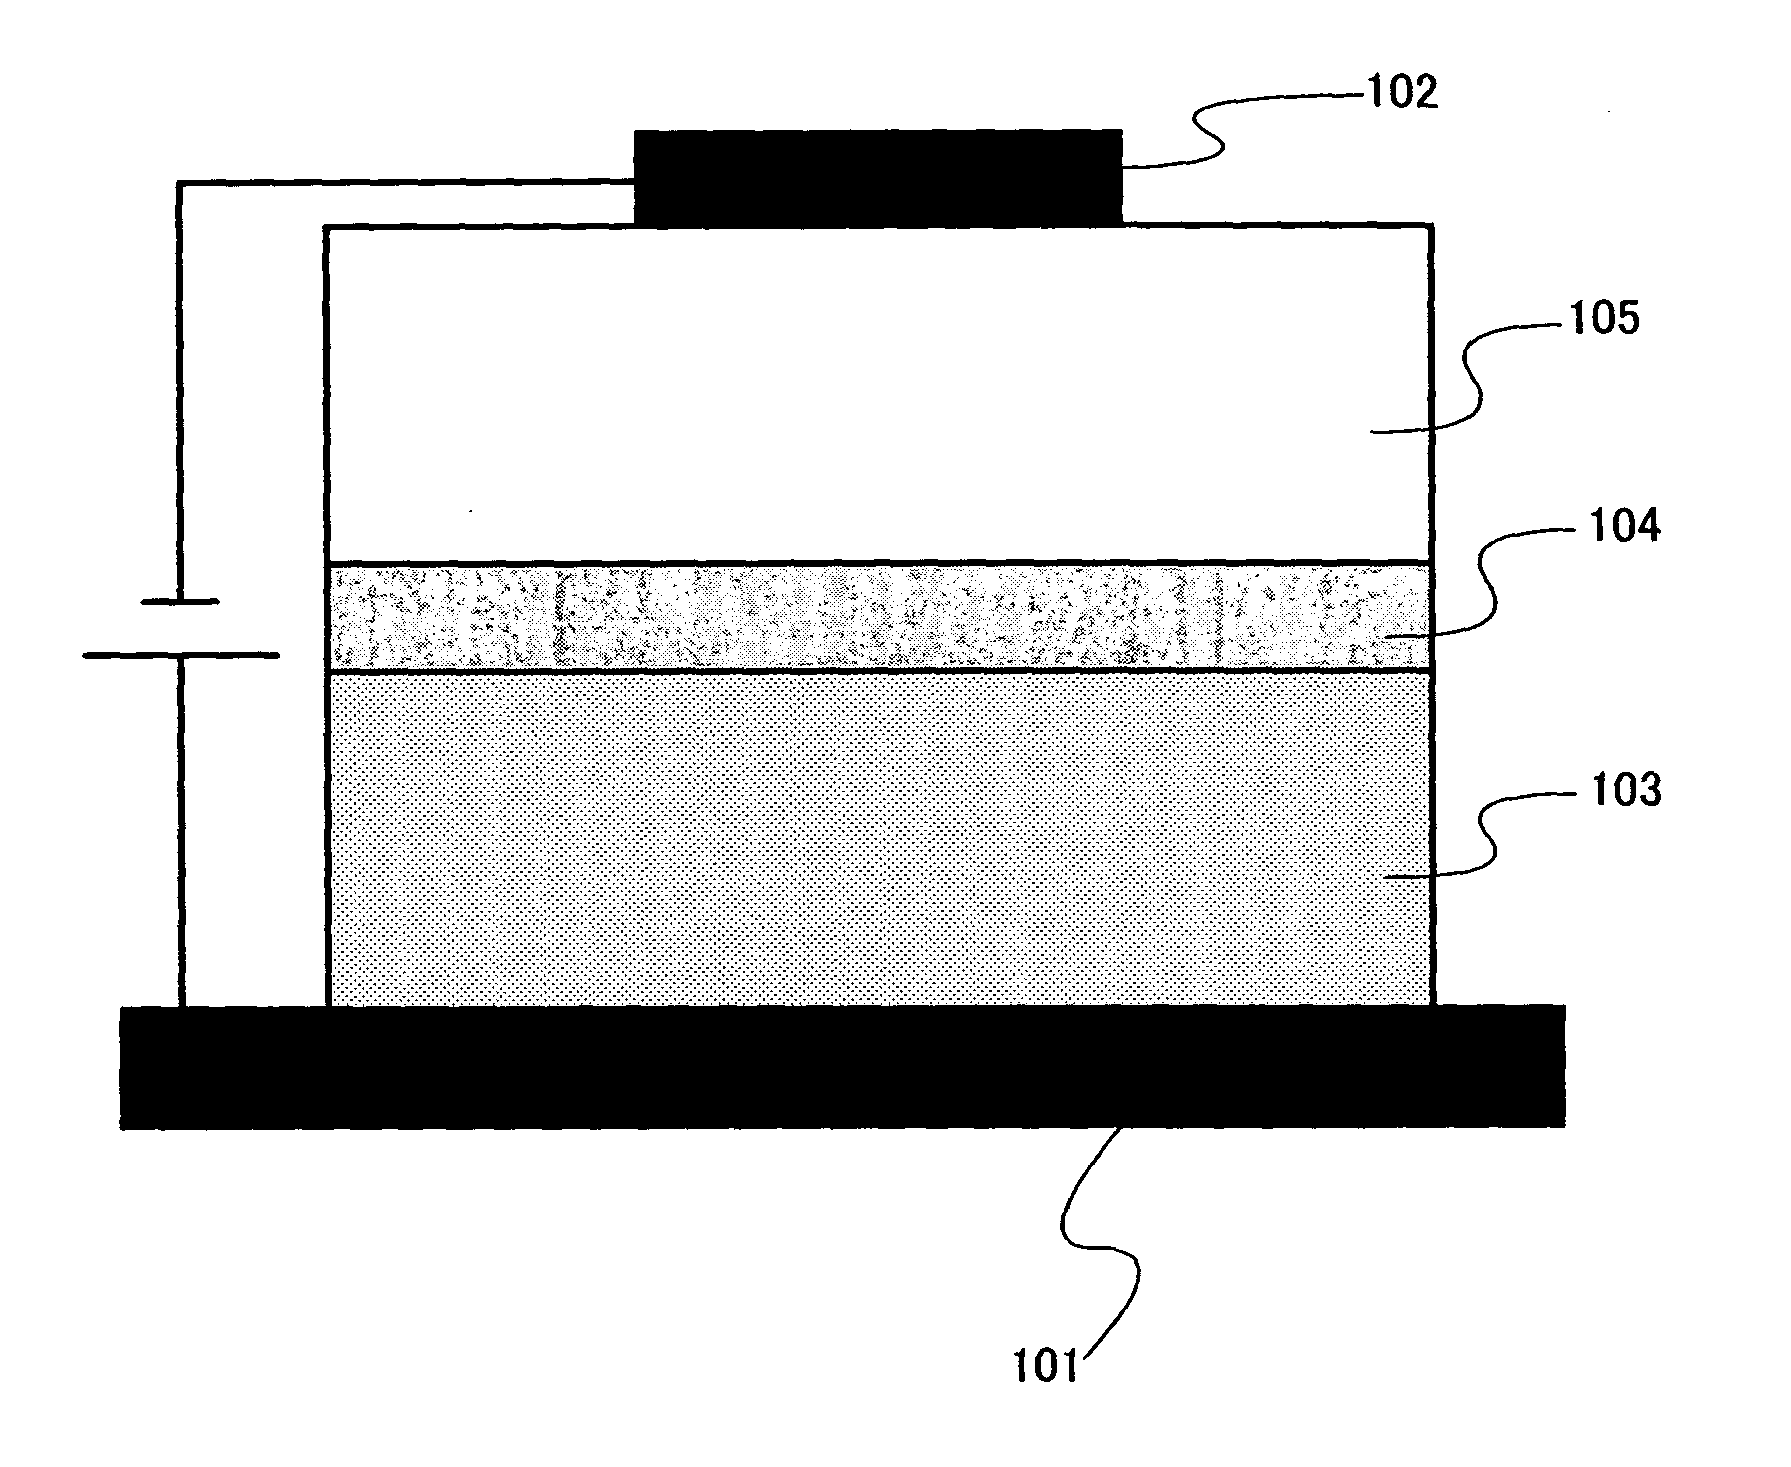 Electroluminescence element and a light emitting device using the same